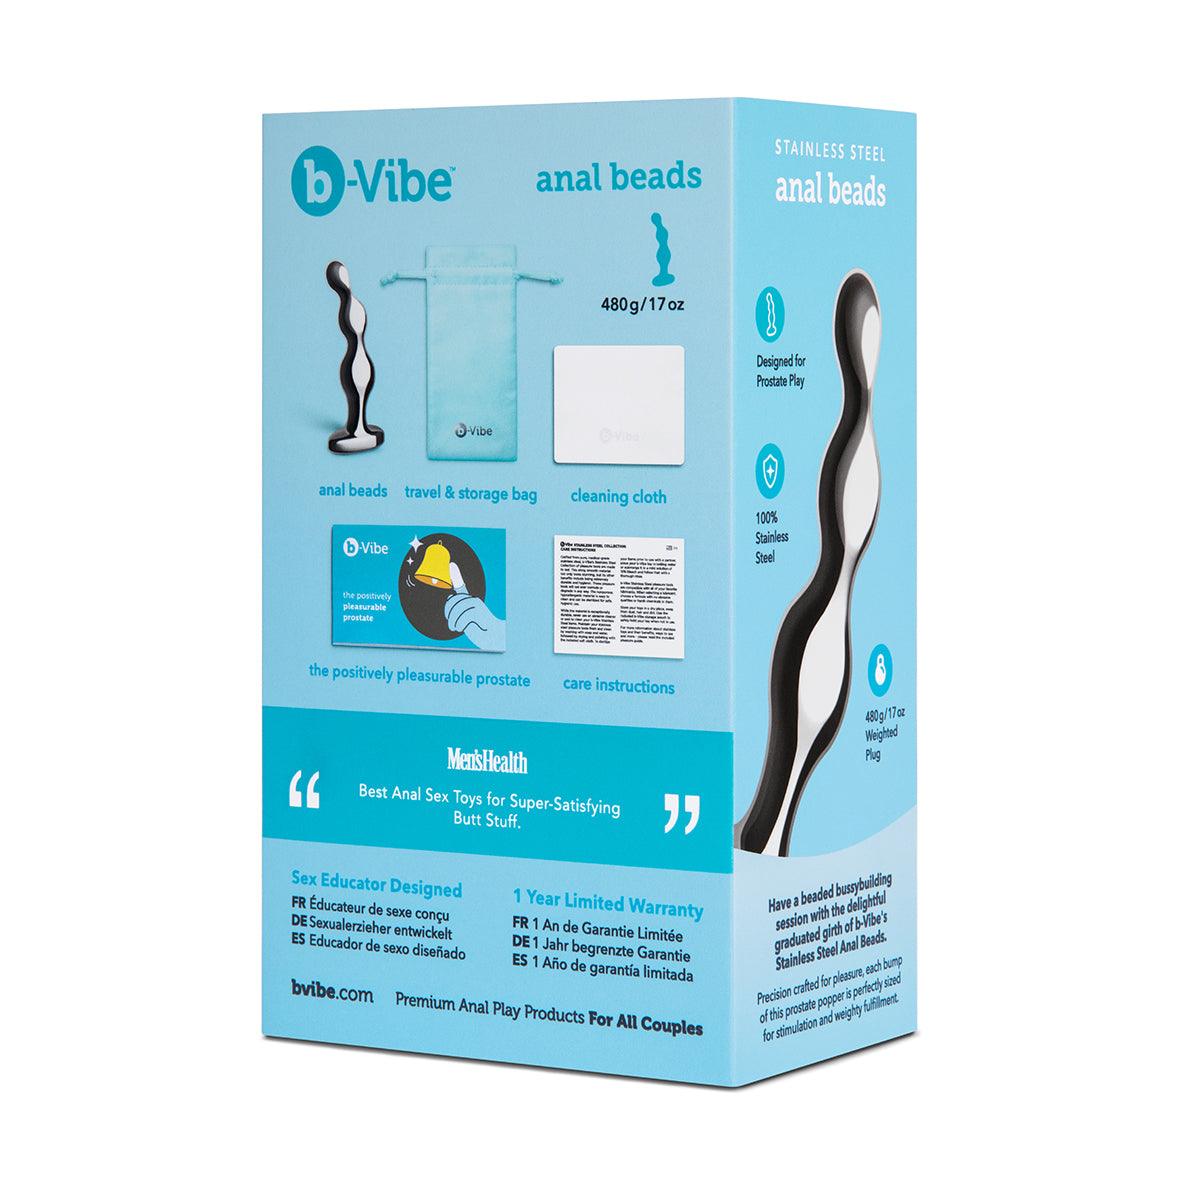 B-Vibe Stainless Steel Anal Beads - shop enby